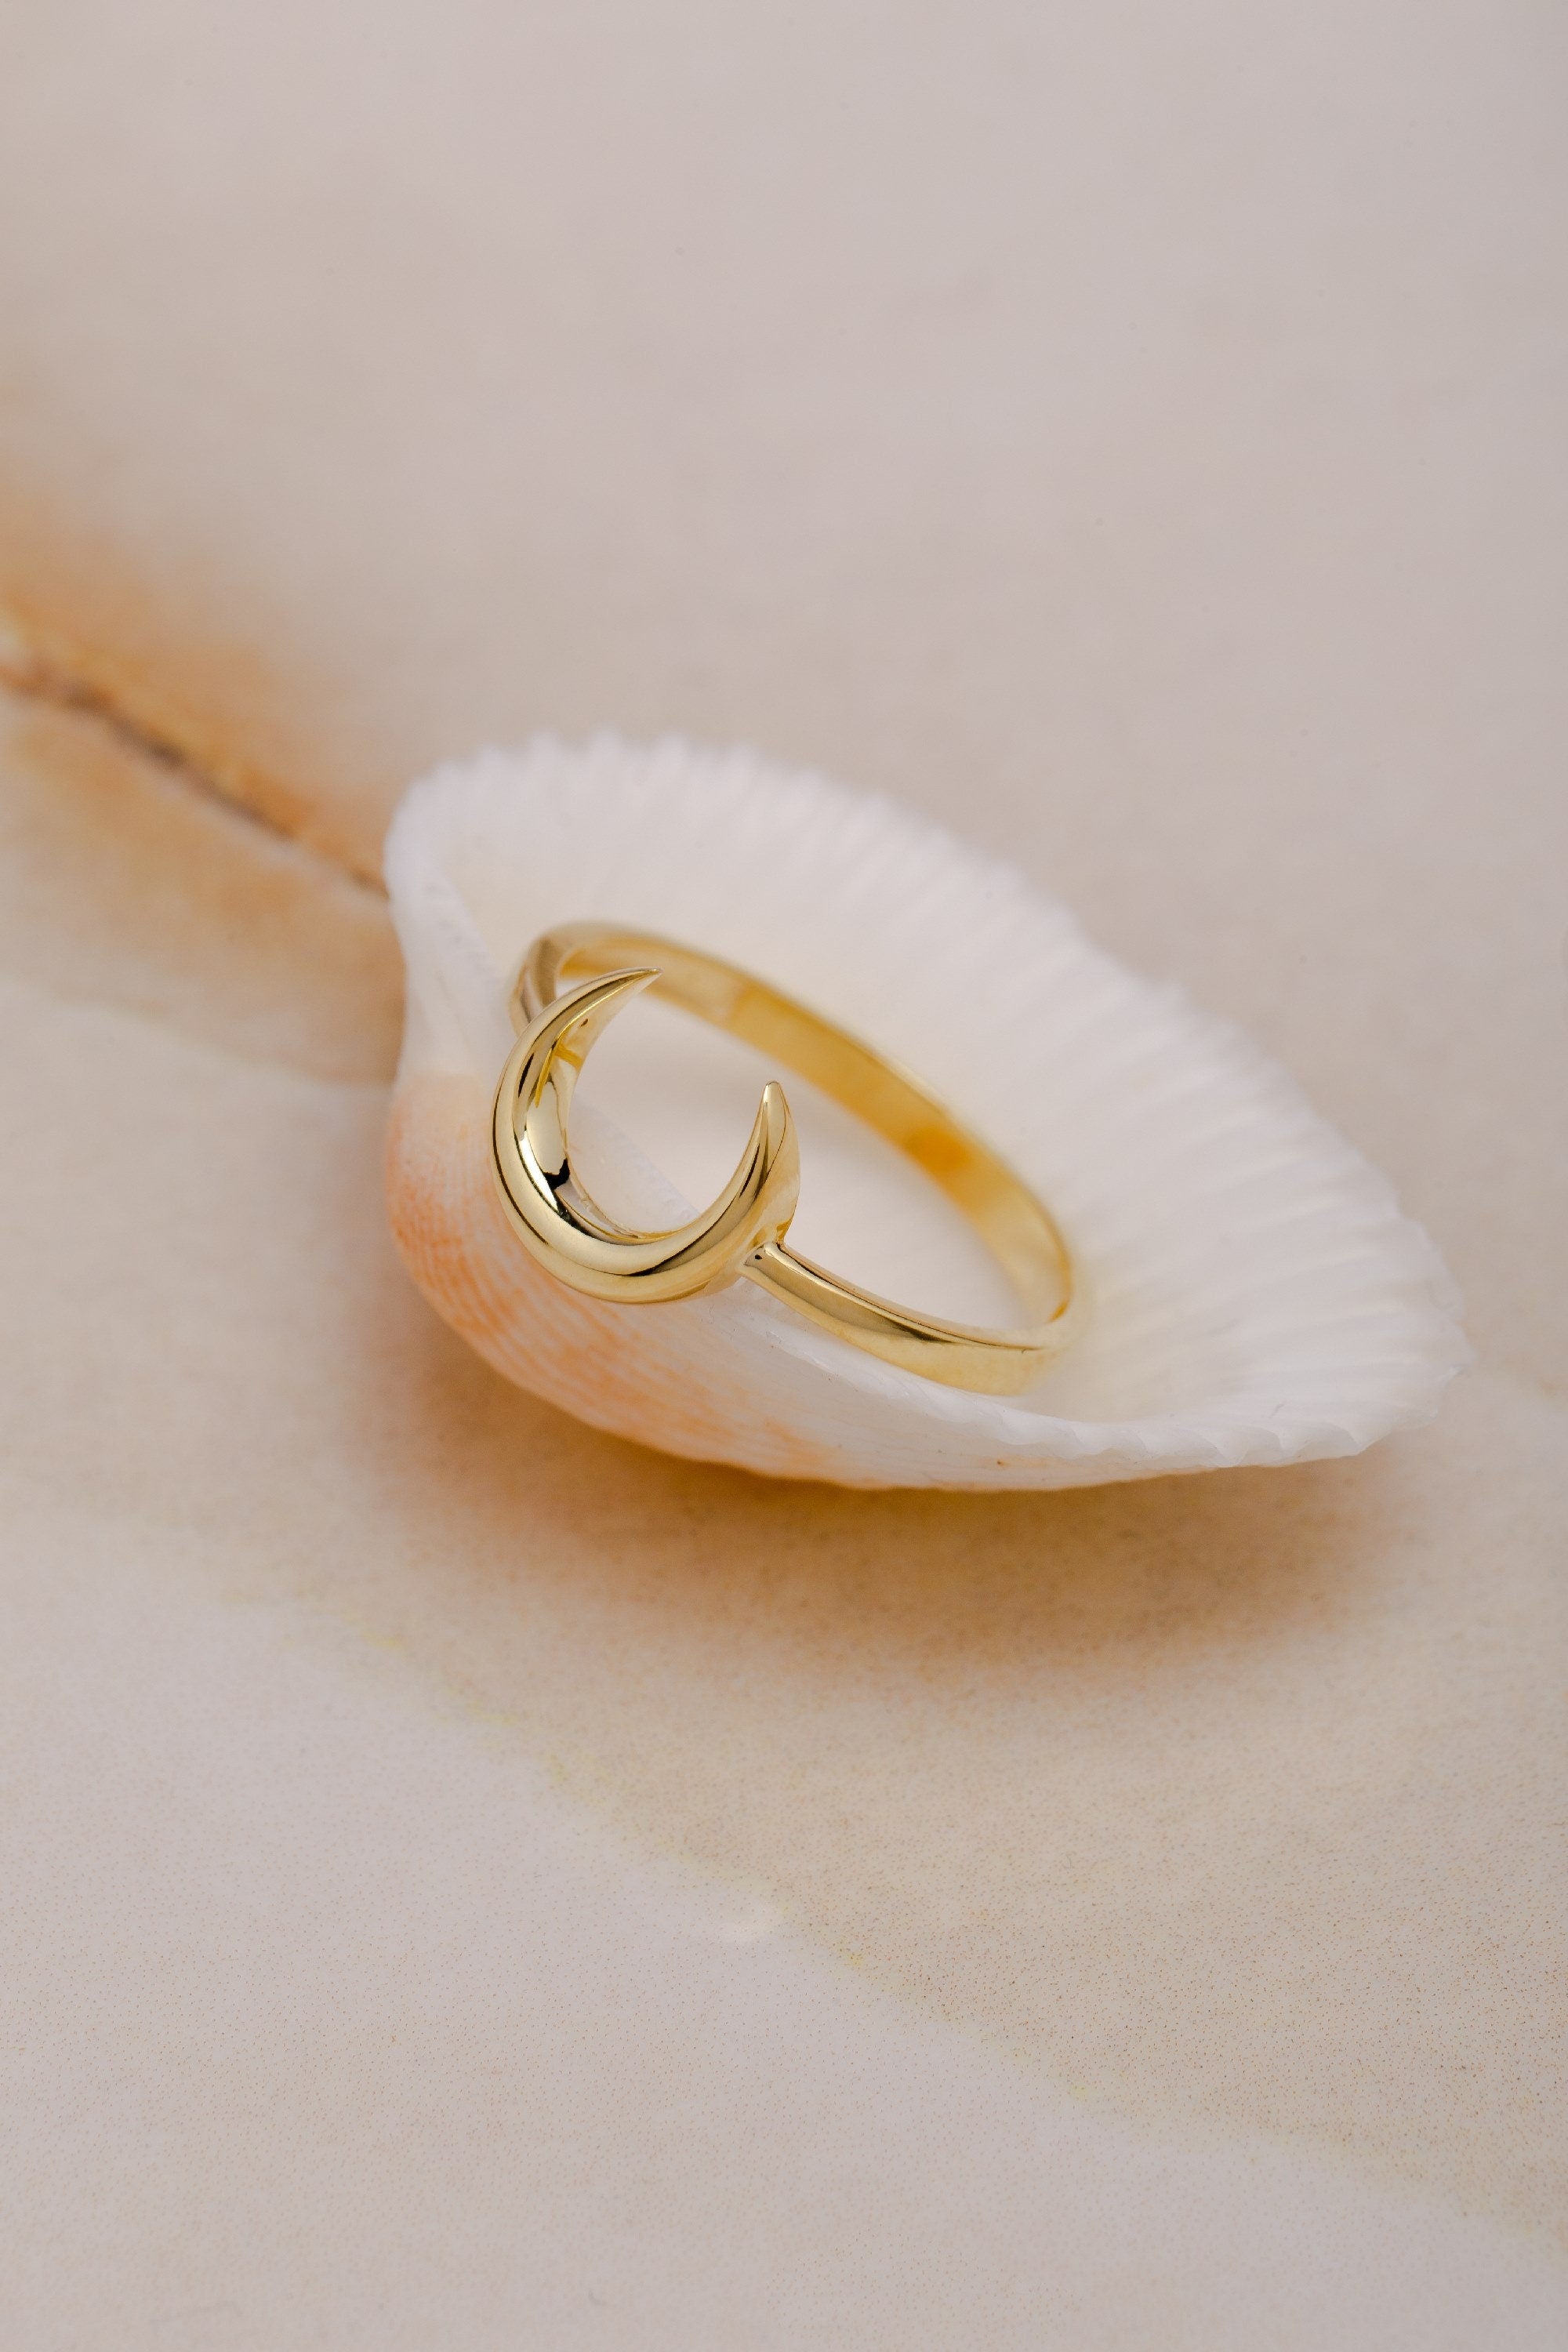 Mother Day Jewelry14k Gold Crescent Moon Rings, Moon Ring Silver, Open Moon Ring, Unique Tiny Moon Ring, ,Gift For Mother Day